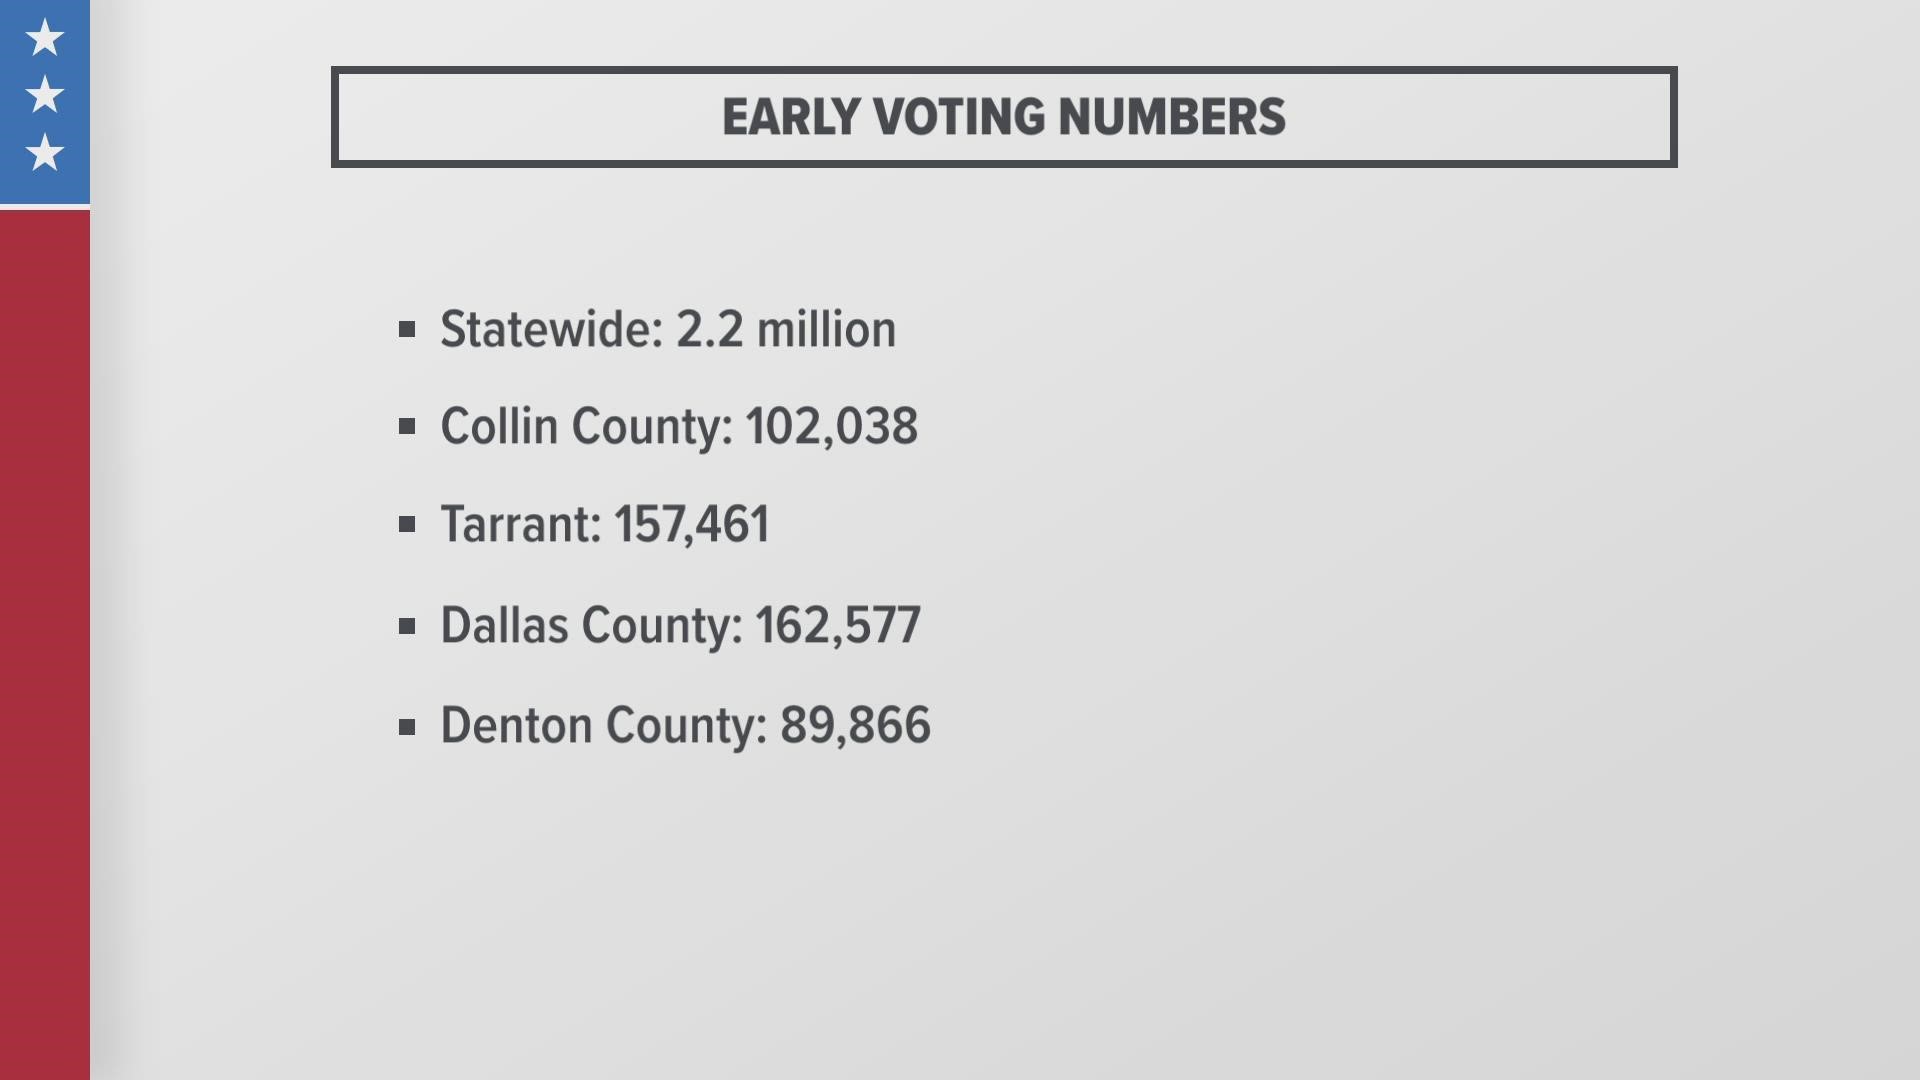 Nearly 2.3 million Texans have voted in the first five days of early voting.